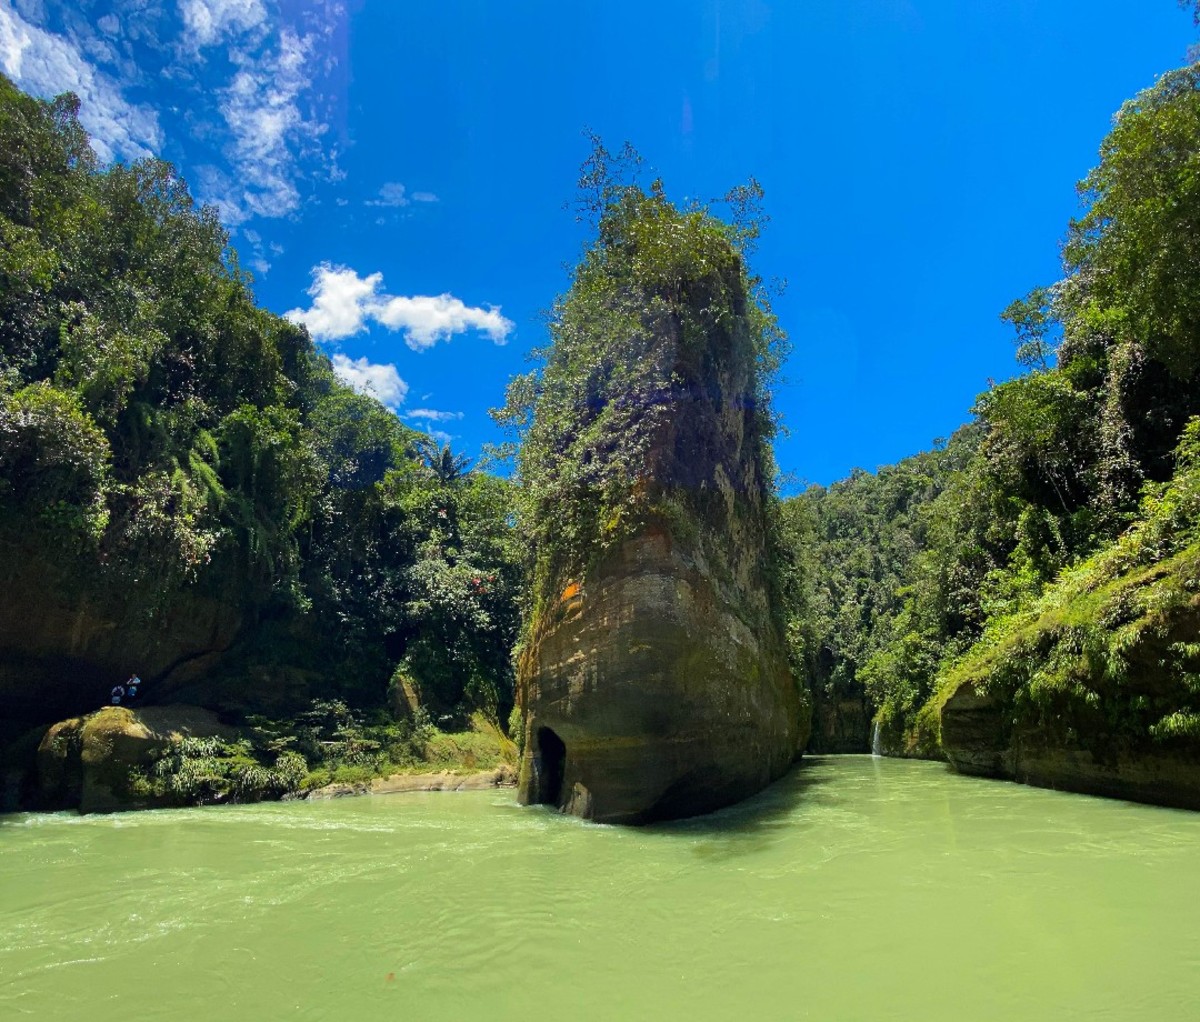 Forested cliffs along a tropical river in Colombia.